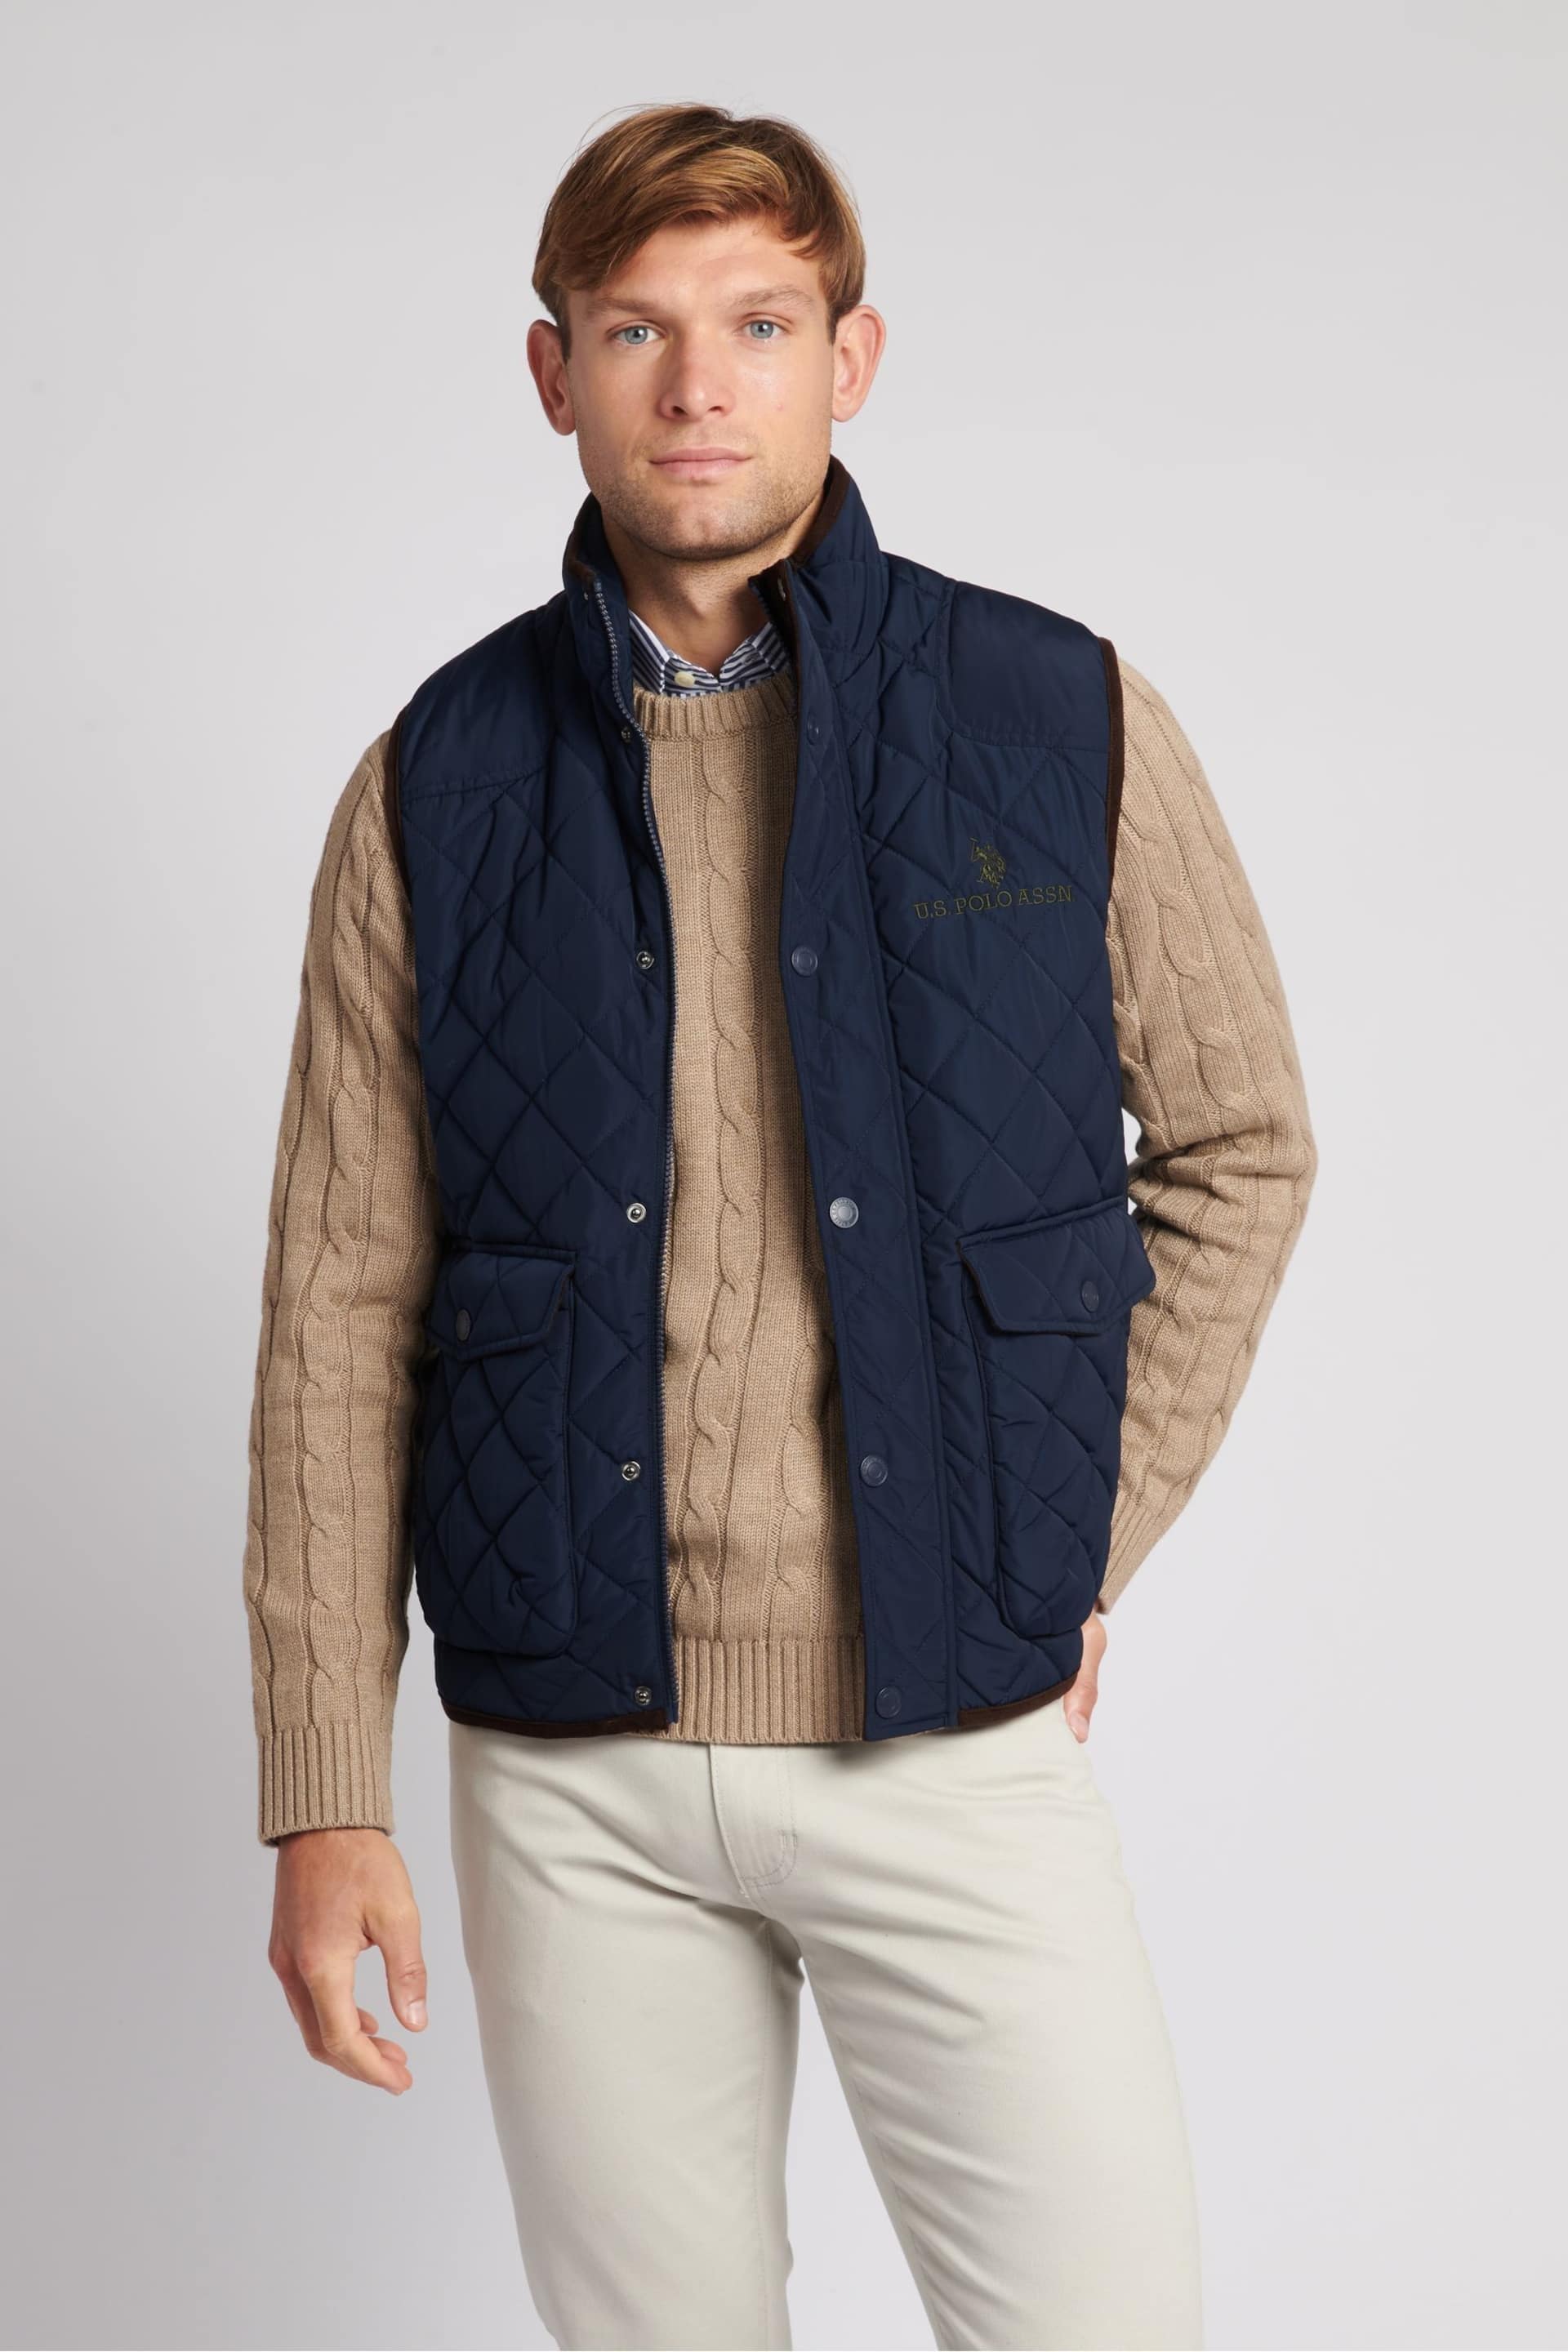 U.S. Polo Assn. Mens Blue Quilted Hacking Gilet - Image 1 of 8